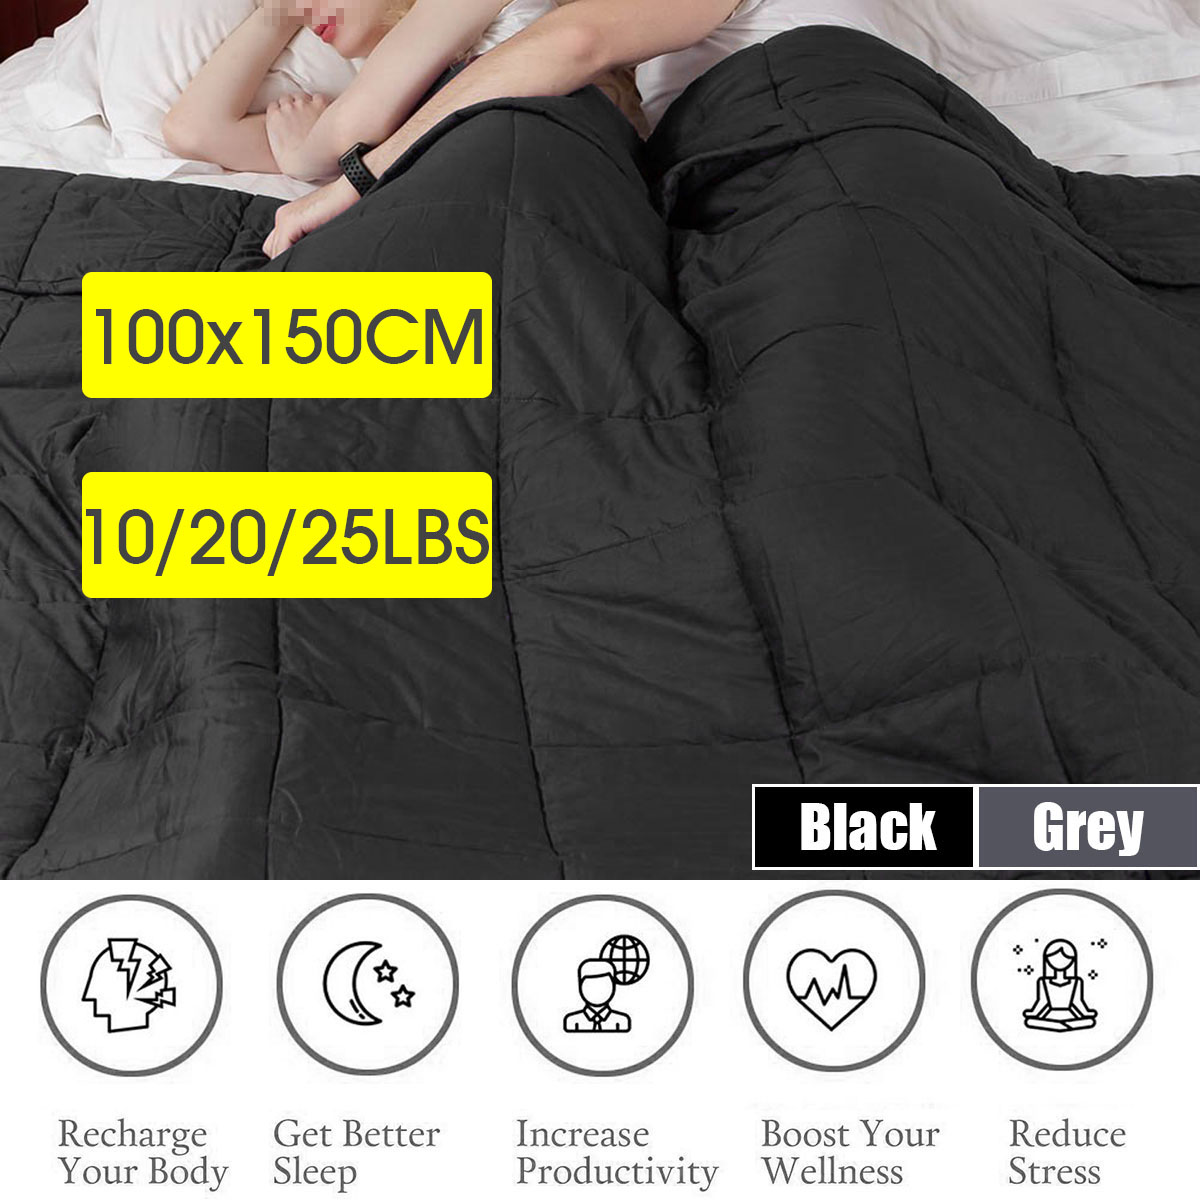 100x150CM-Weighted-Cotton-Blanket-Heavy-Sensory-Relax-45--7--95Kg-Black-Blankets-1349469-2